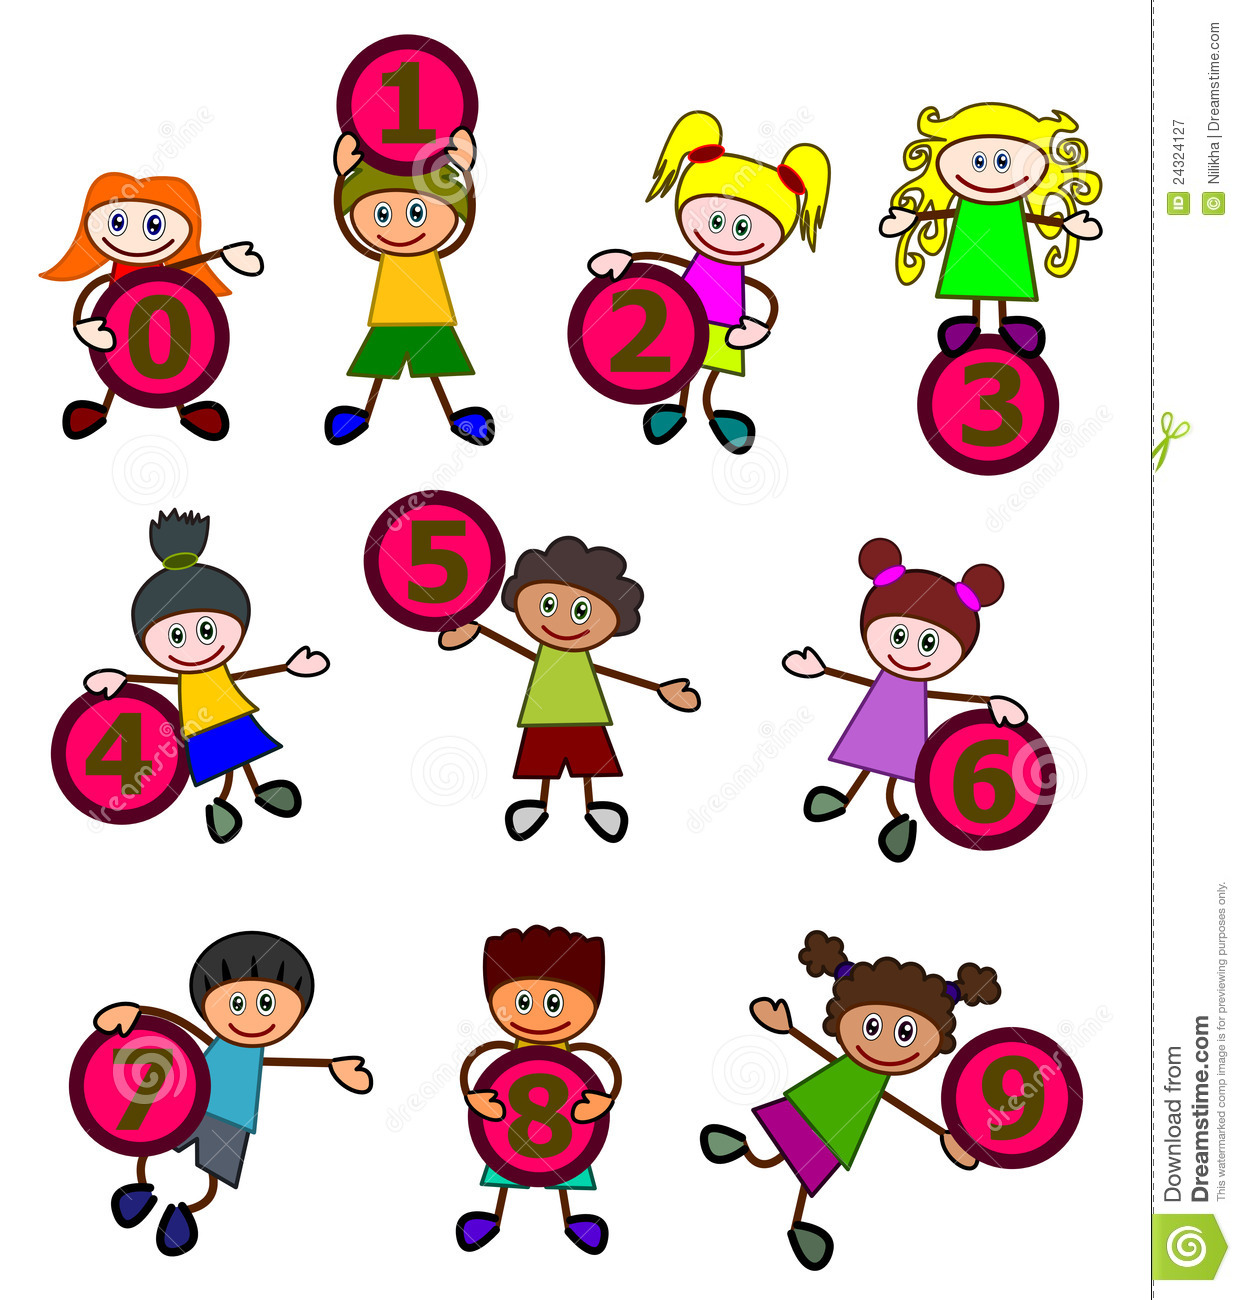 Kids Counting Royalty Free Stock Photography   Image  24324127